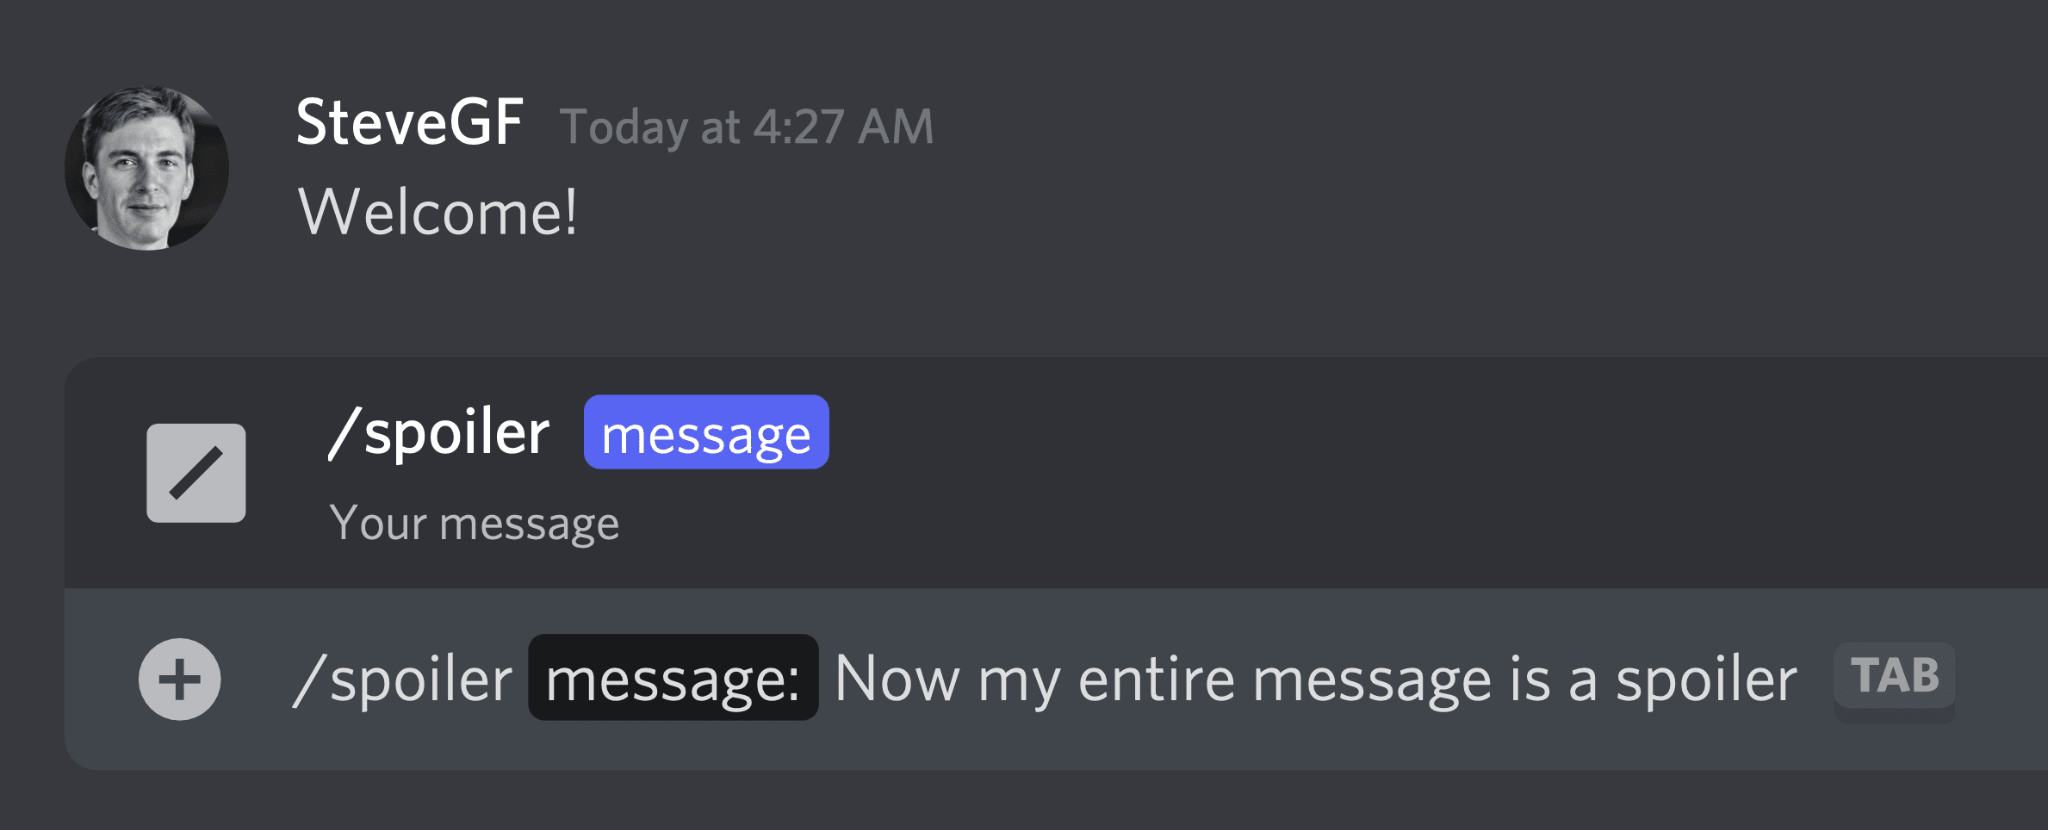 spoiler effects in one whole message